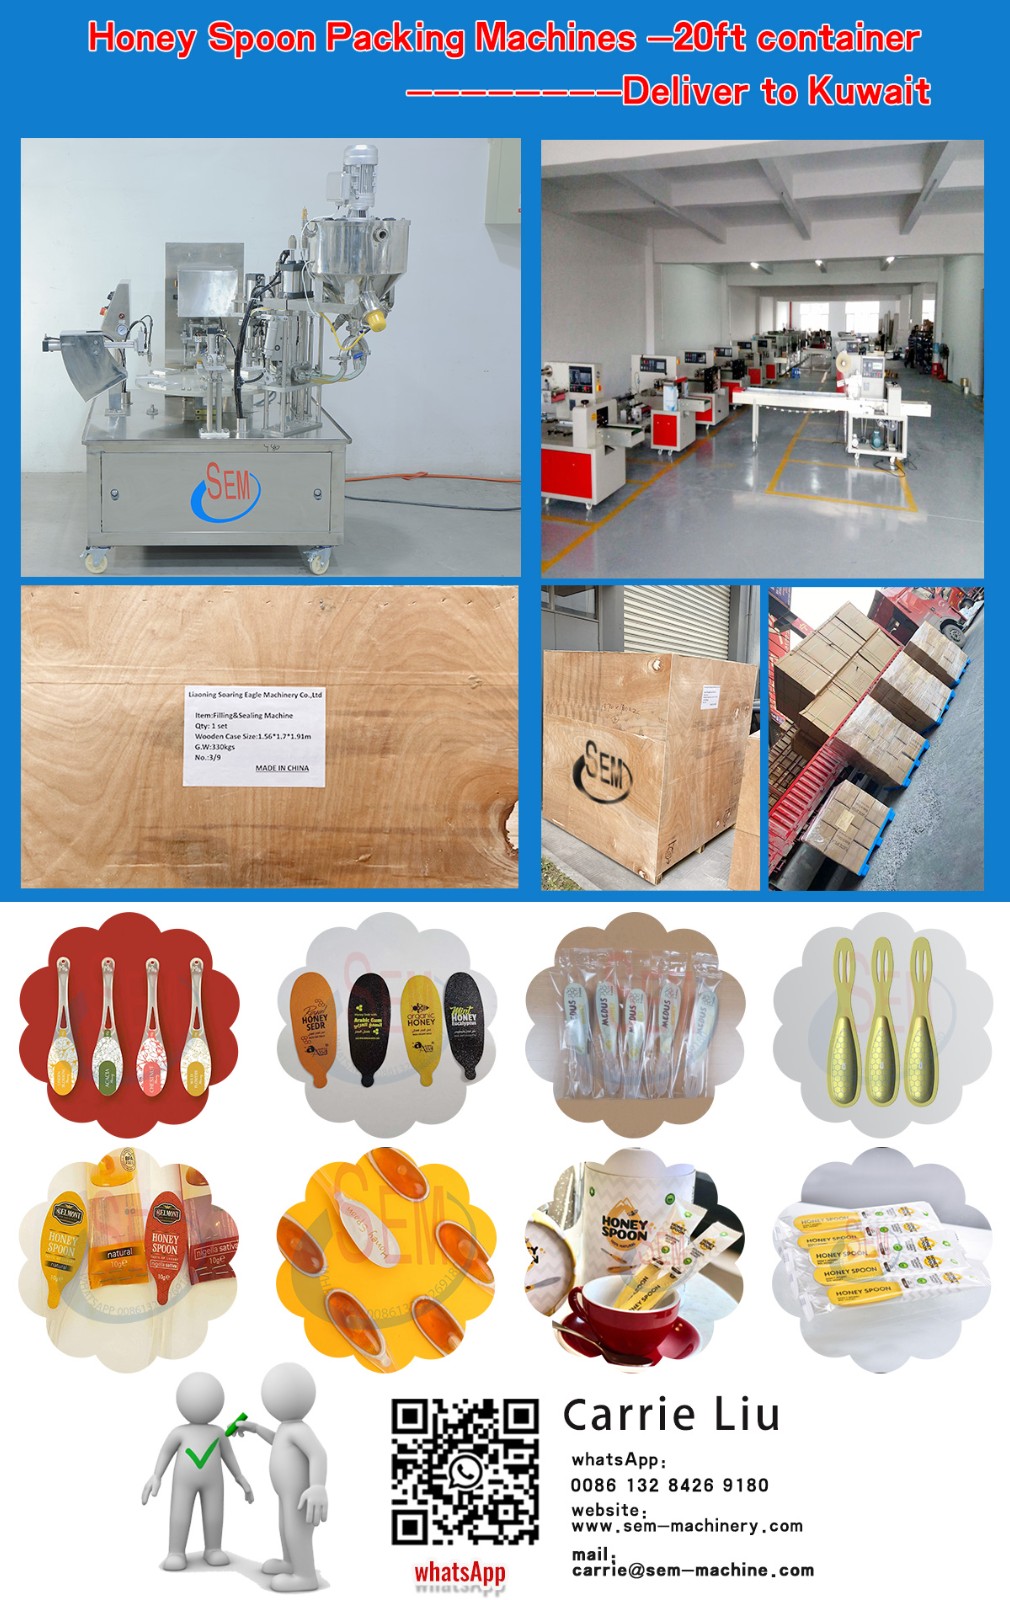 Honey spoon packing machine  delivered to Kuwait